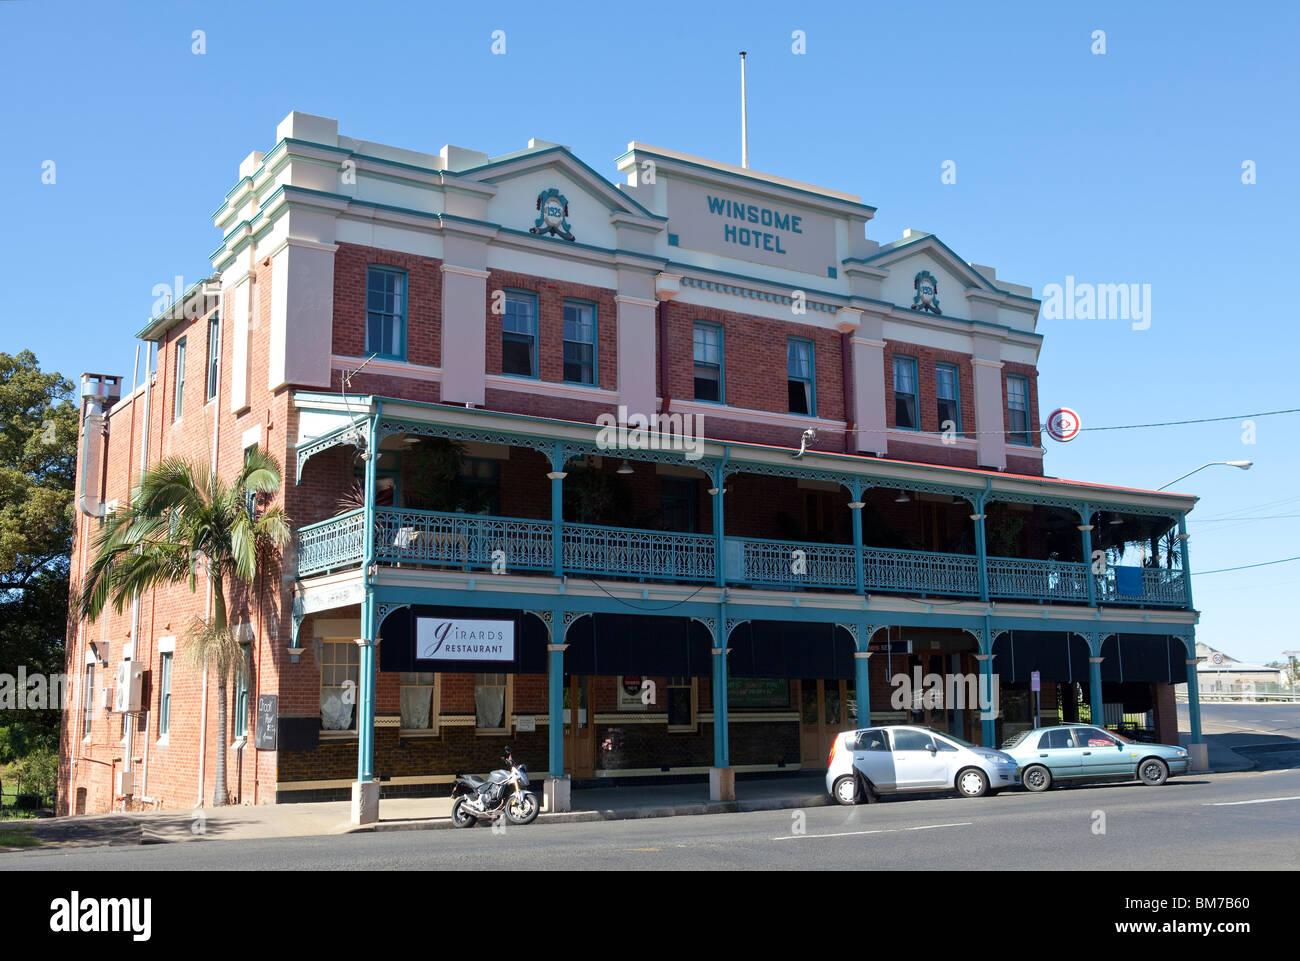 Winsome Hotel, Lismore, New South Wales, Australia Stock Photo